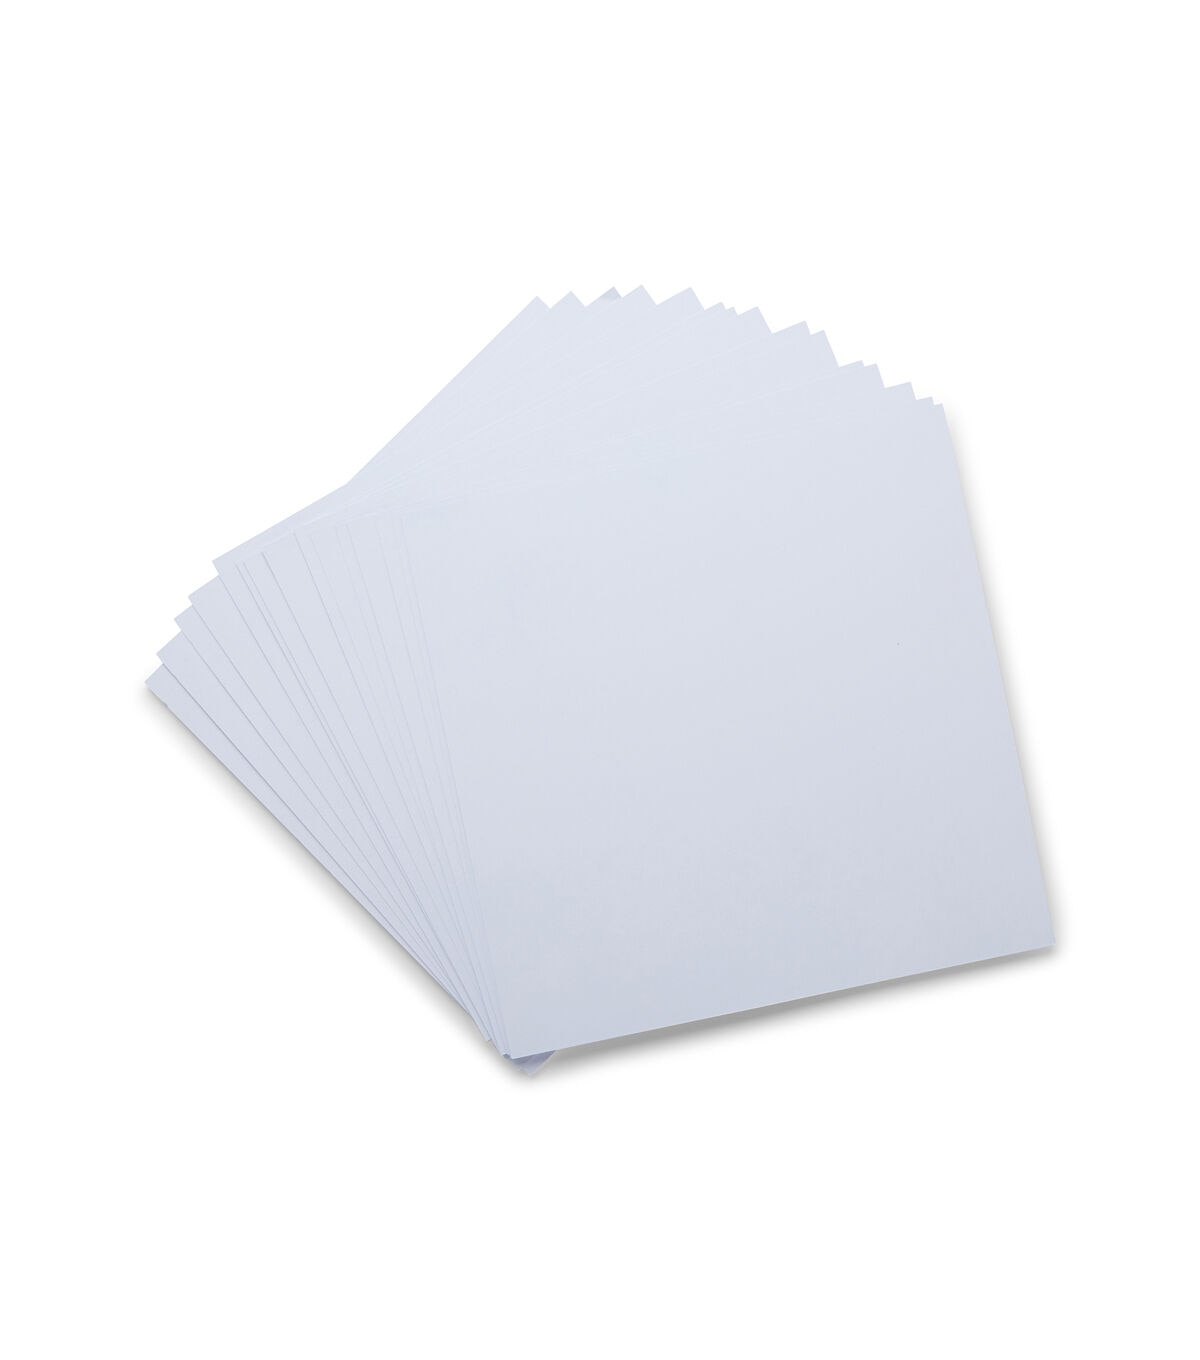 12x12 Cardstock Paper Pack - 110 lb White Cardstock Scrapbook Paper - Heavy Duty Double Sided Card Stock for Crafts, Embossing, Cardmaking - 40